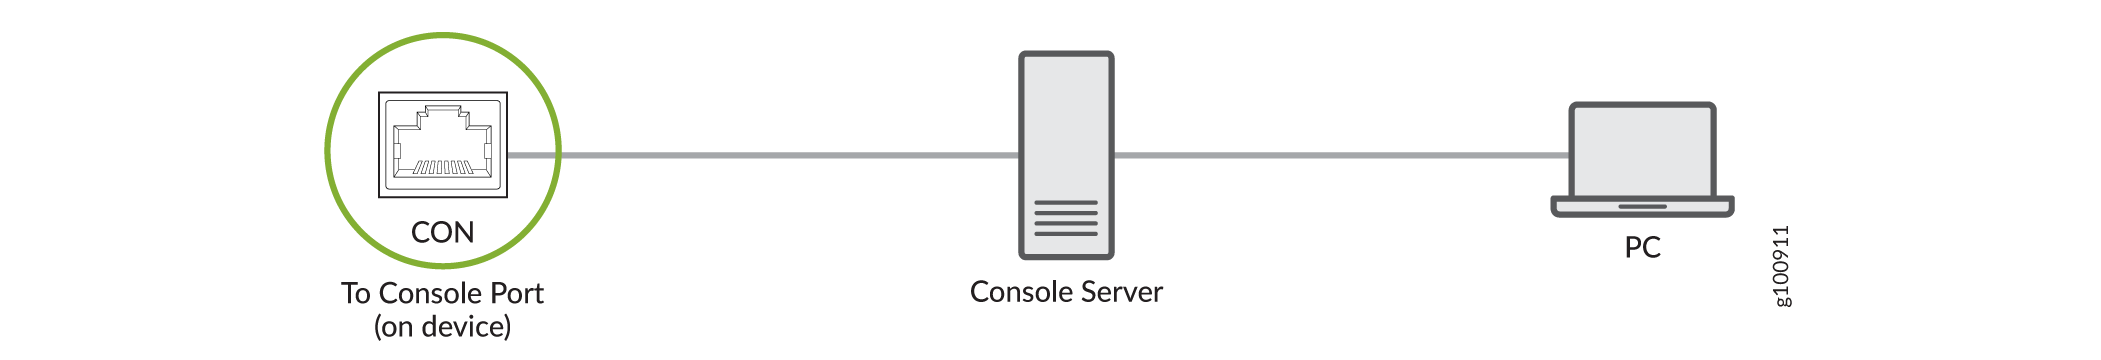 Connecting
the CTP151 Device to a Management Console Through a Console Server